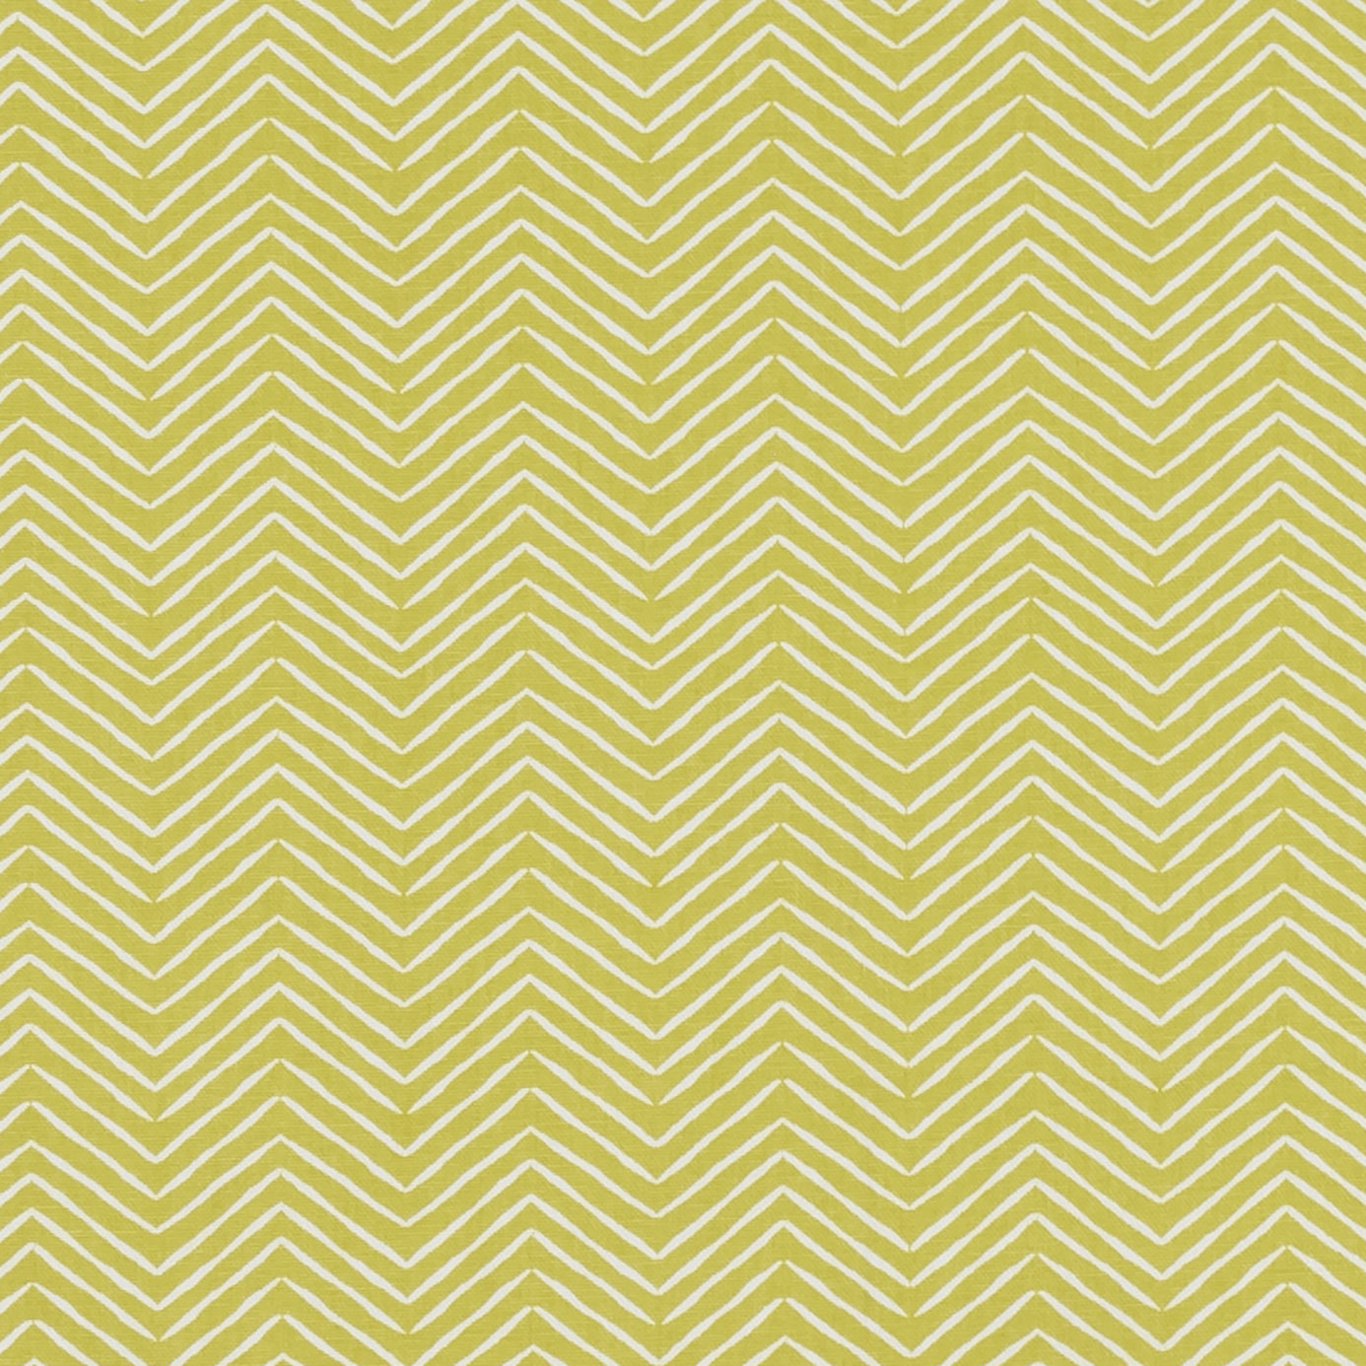 Pica Citrus Fabric by CNC